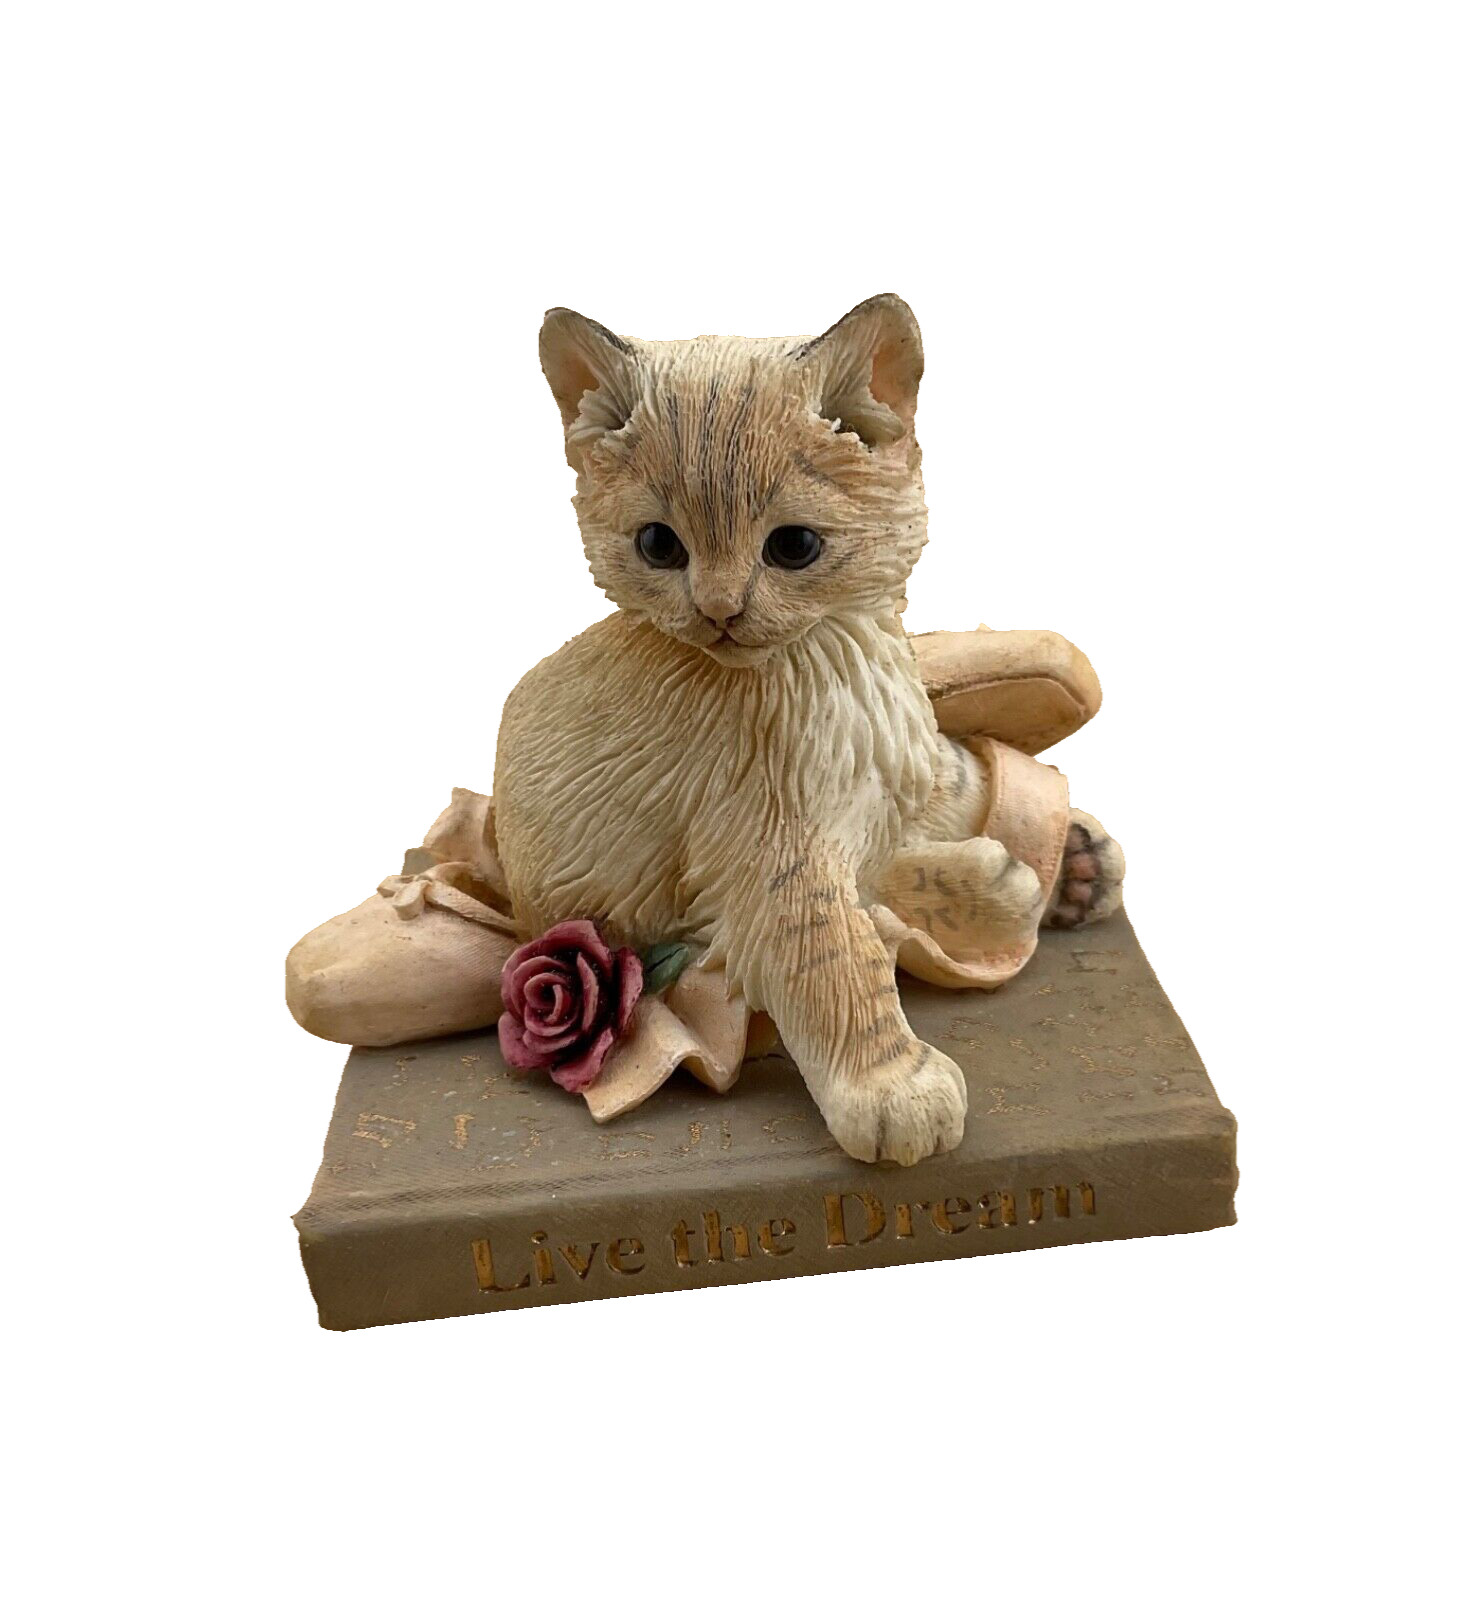 Country Artists kitten sitting on a book “ live the dream”  figurine